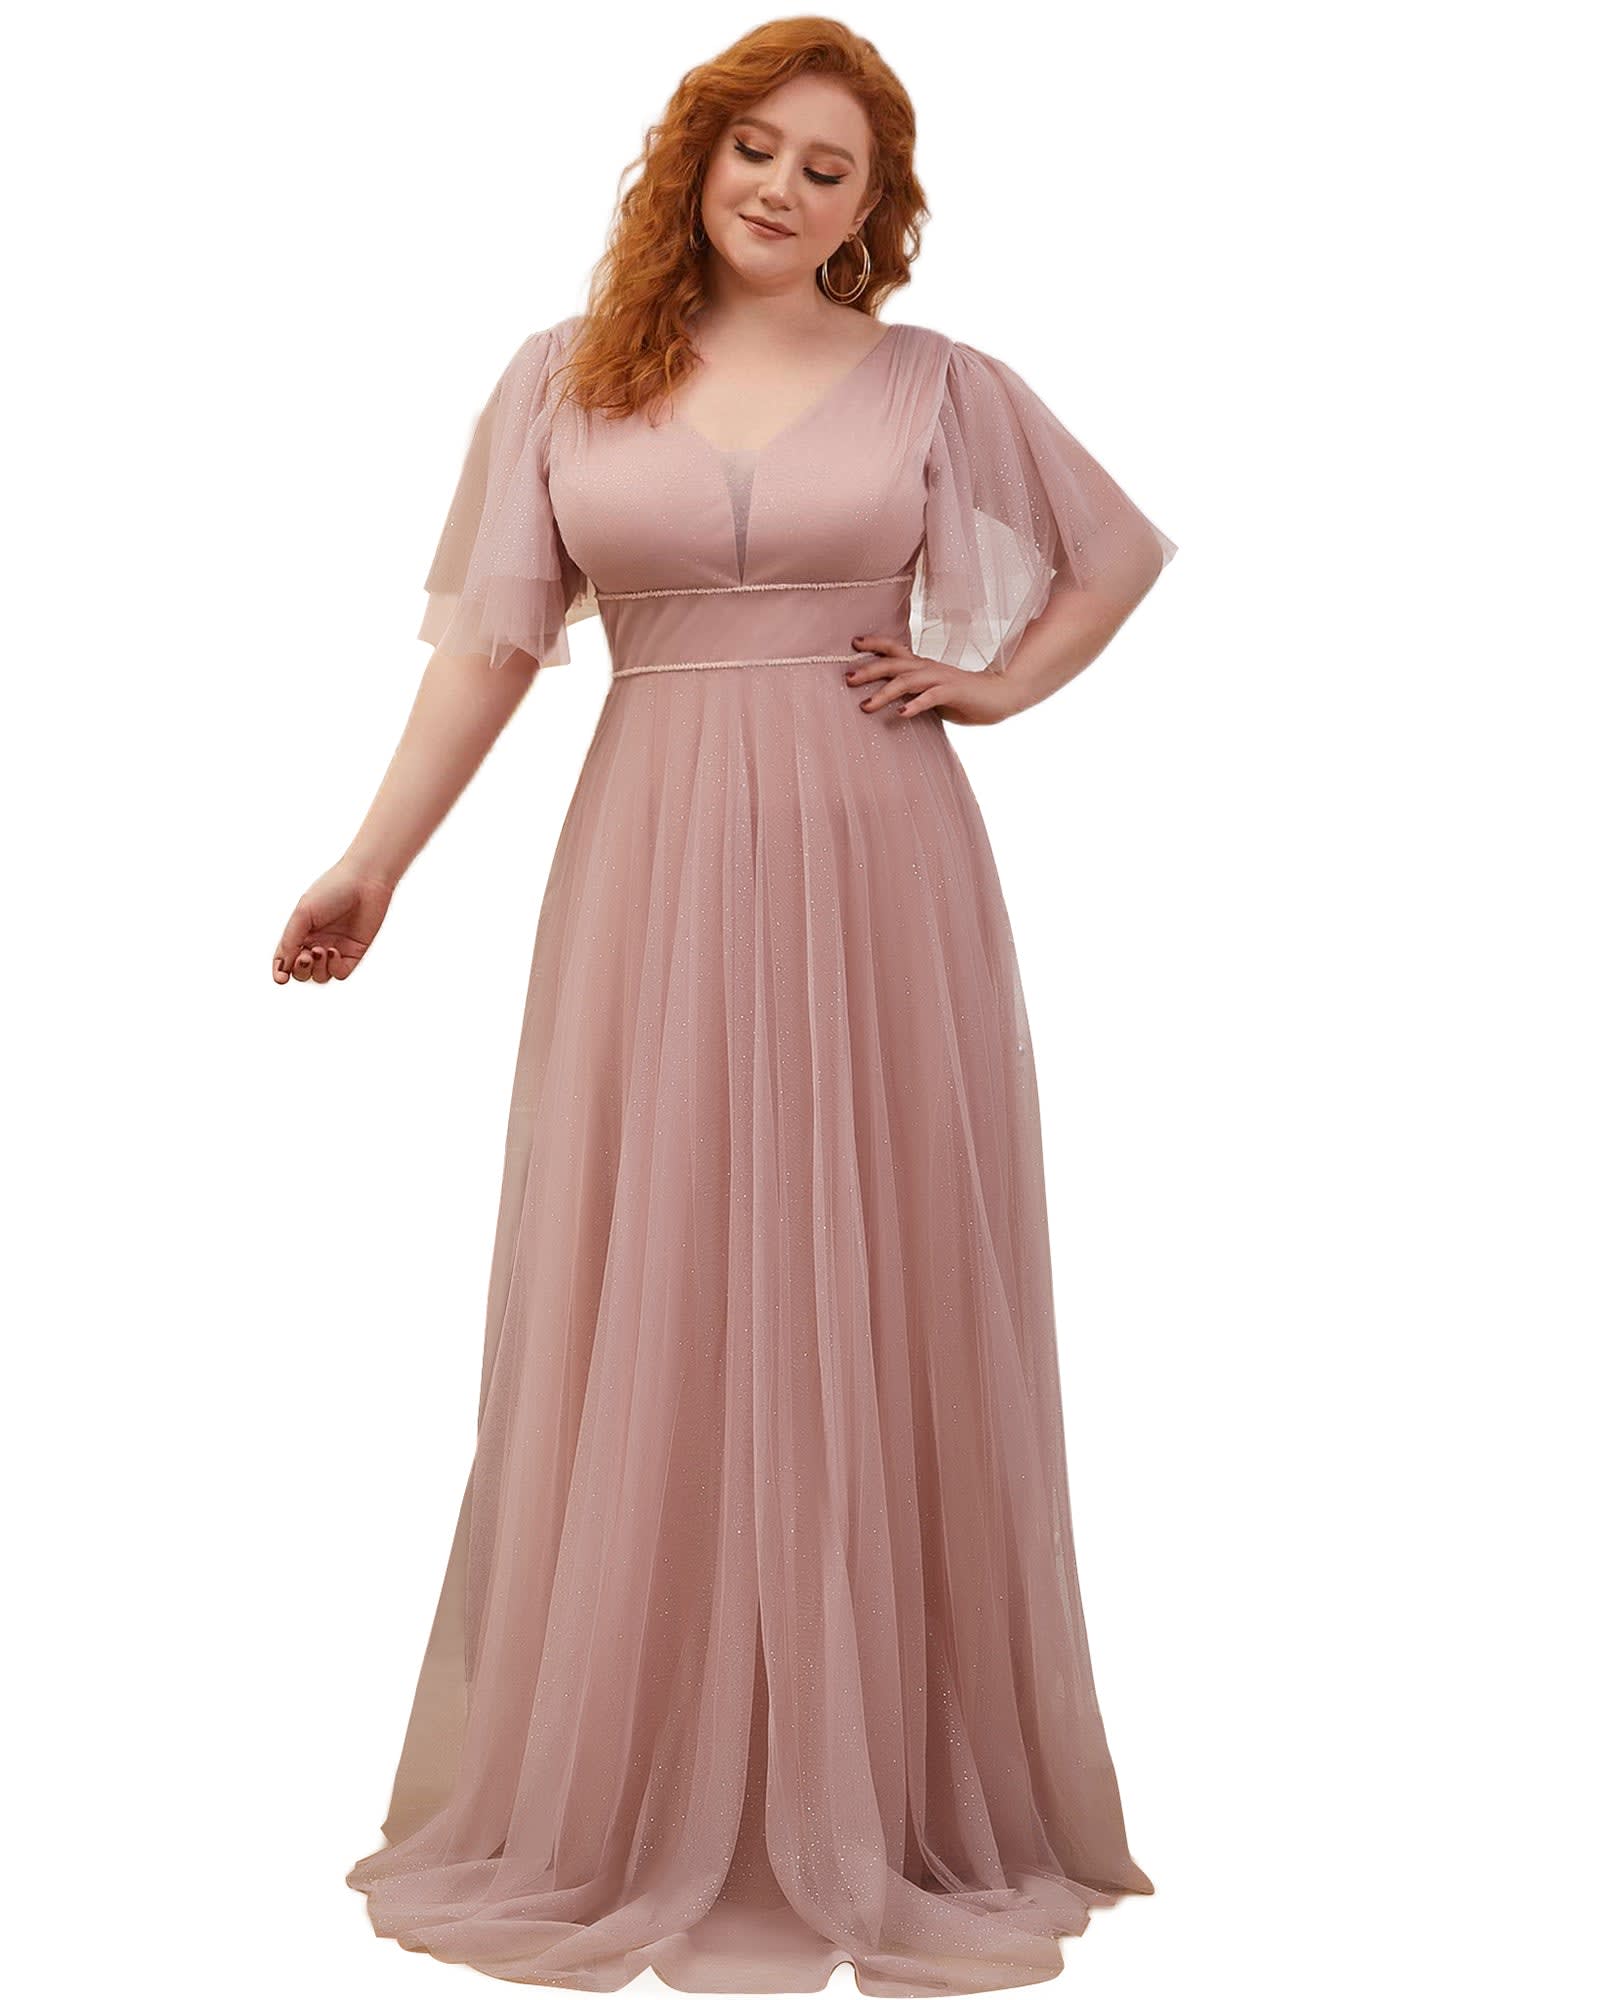 Rose Gold Plus Size Womens Suit For Weddings, Parties, And Formal